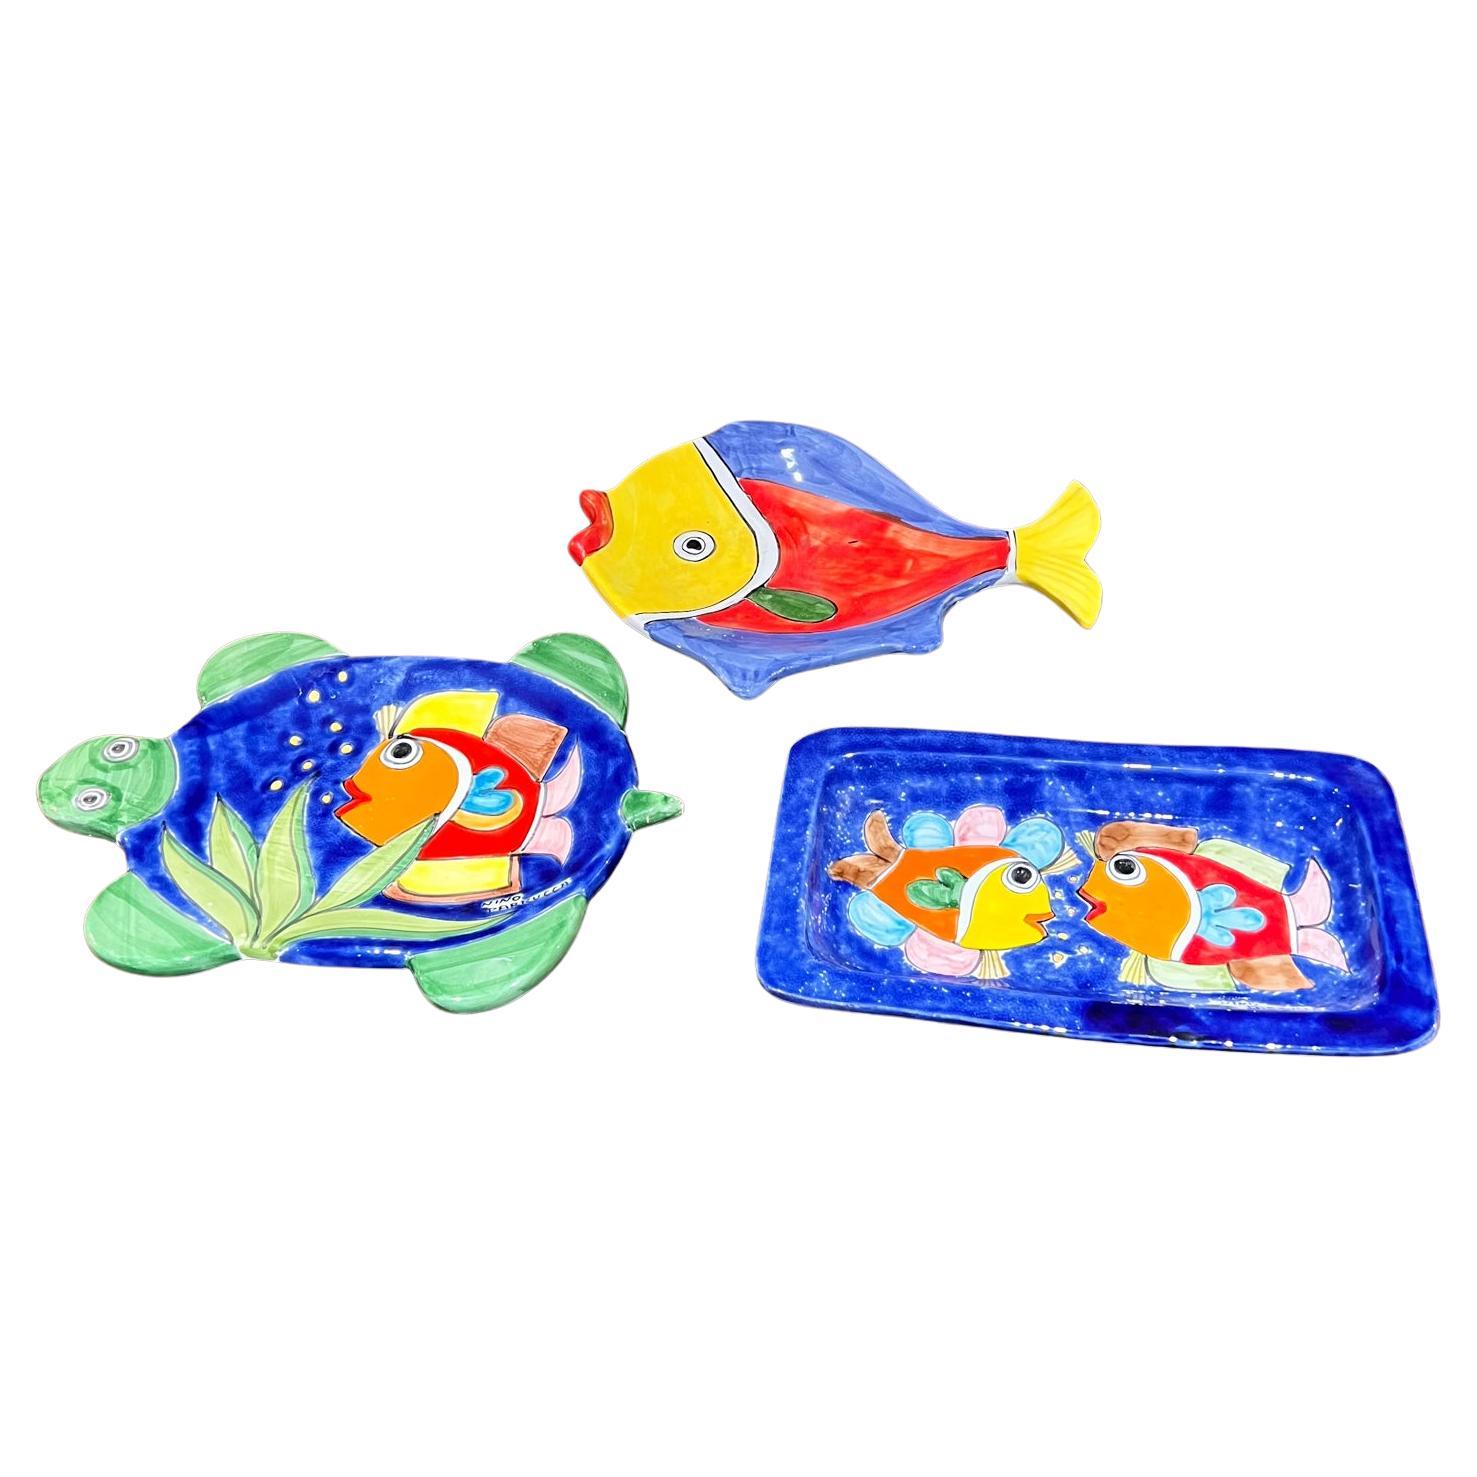 1970s Nino Parrucca Italian Pottery Fish Plate Set Sicily For Sale